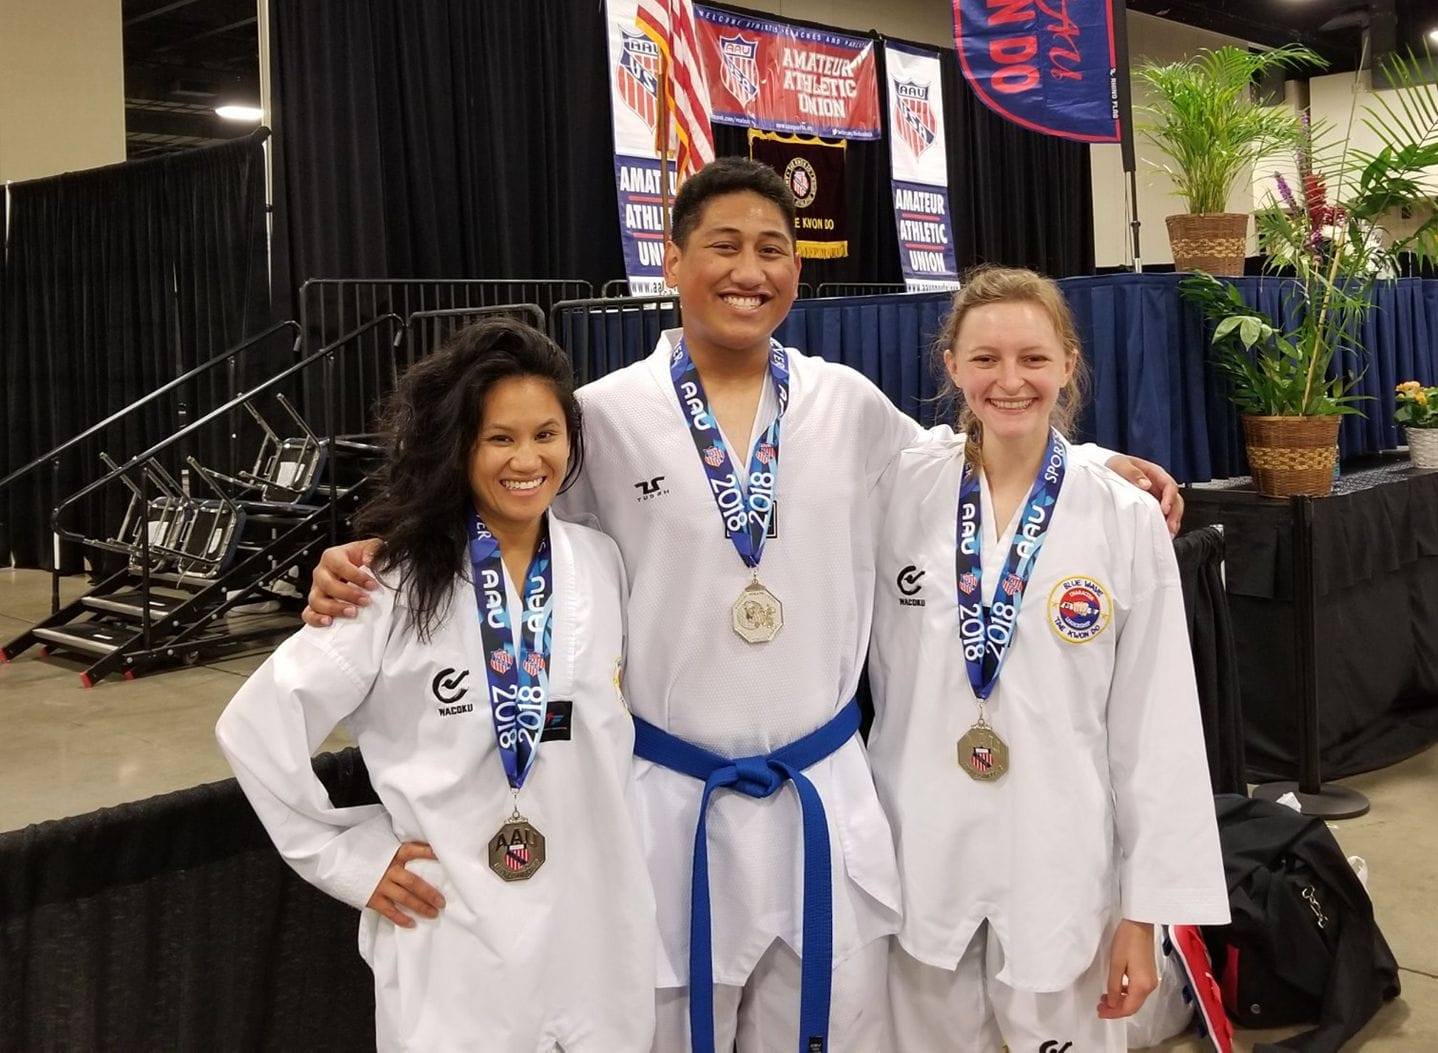 AAU Nationals - Our Blue Belts